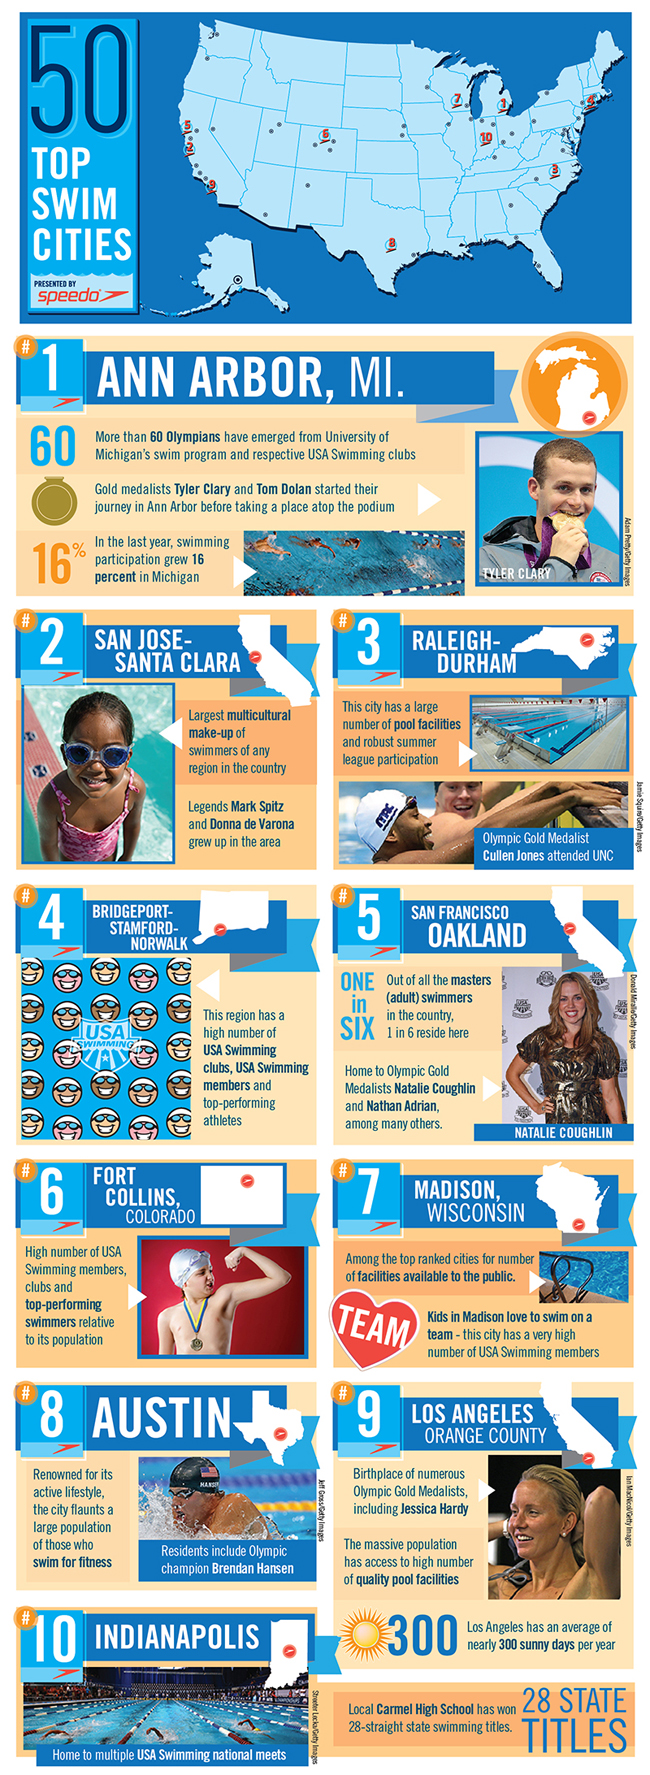 50 Top Swim Cities Infographic - Kids swimming to be future medalists